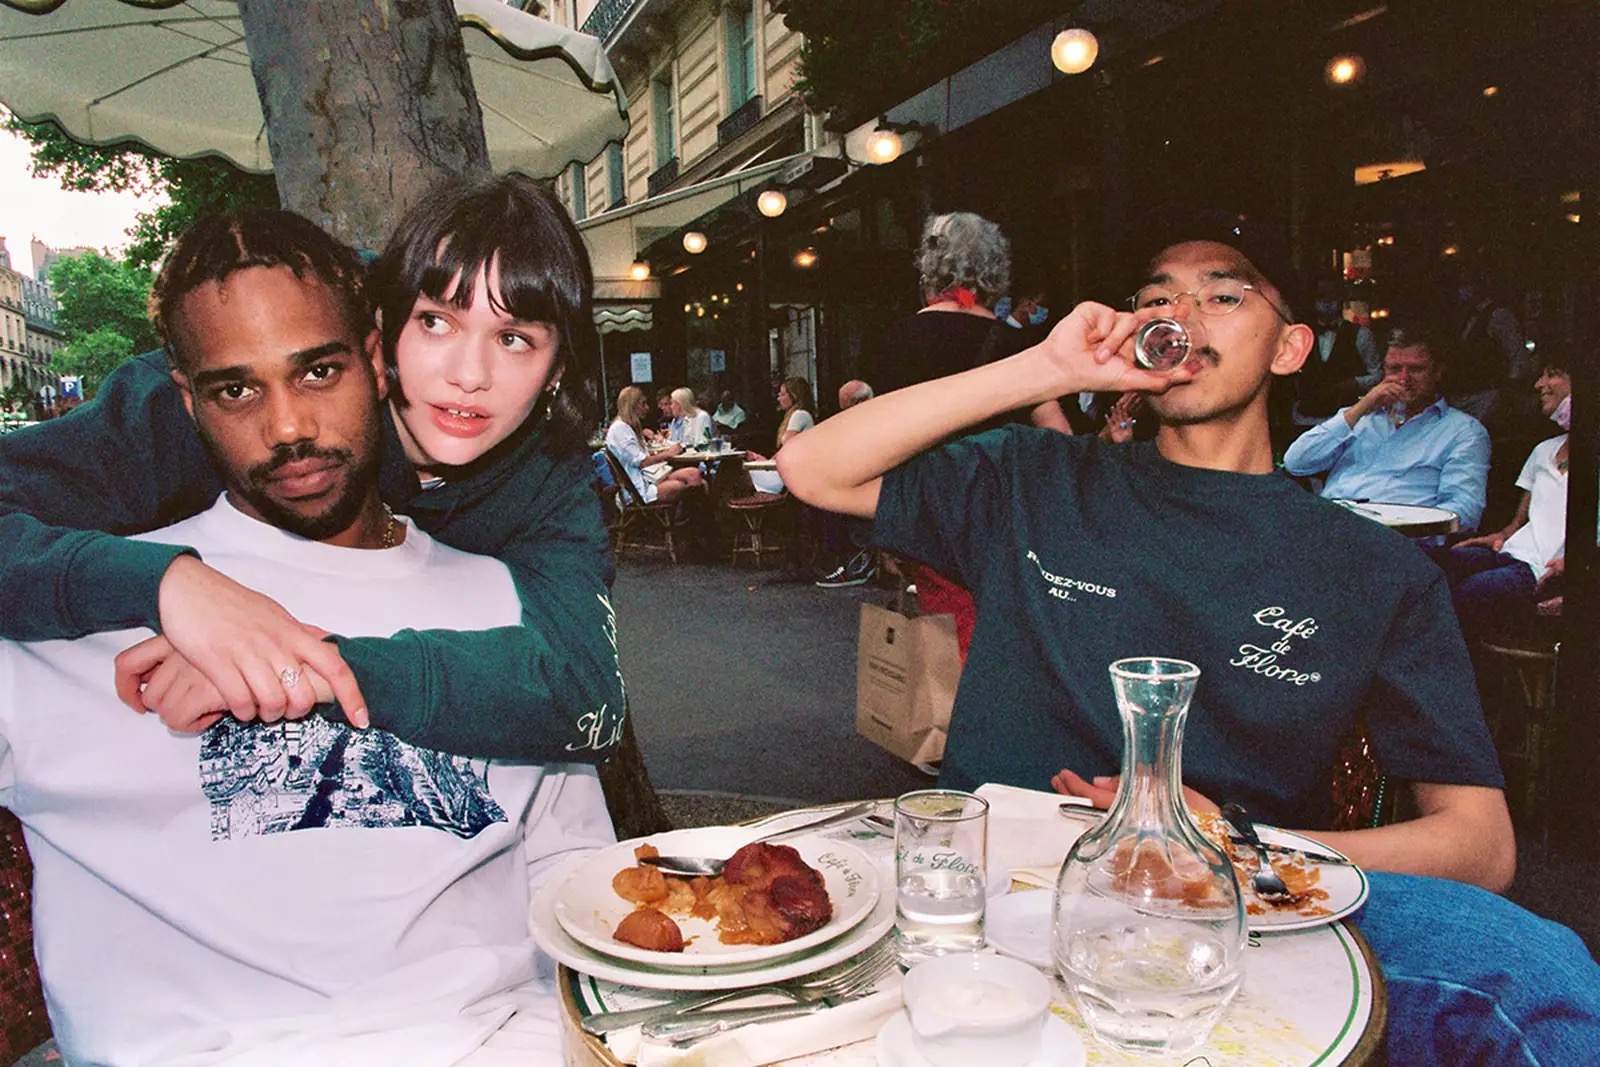 Three young people at a busy sidewalk cafe table with a half eaten meal in front of them